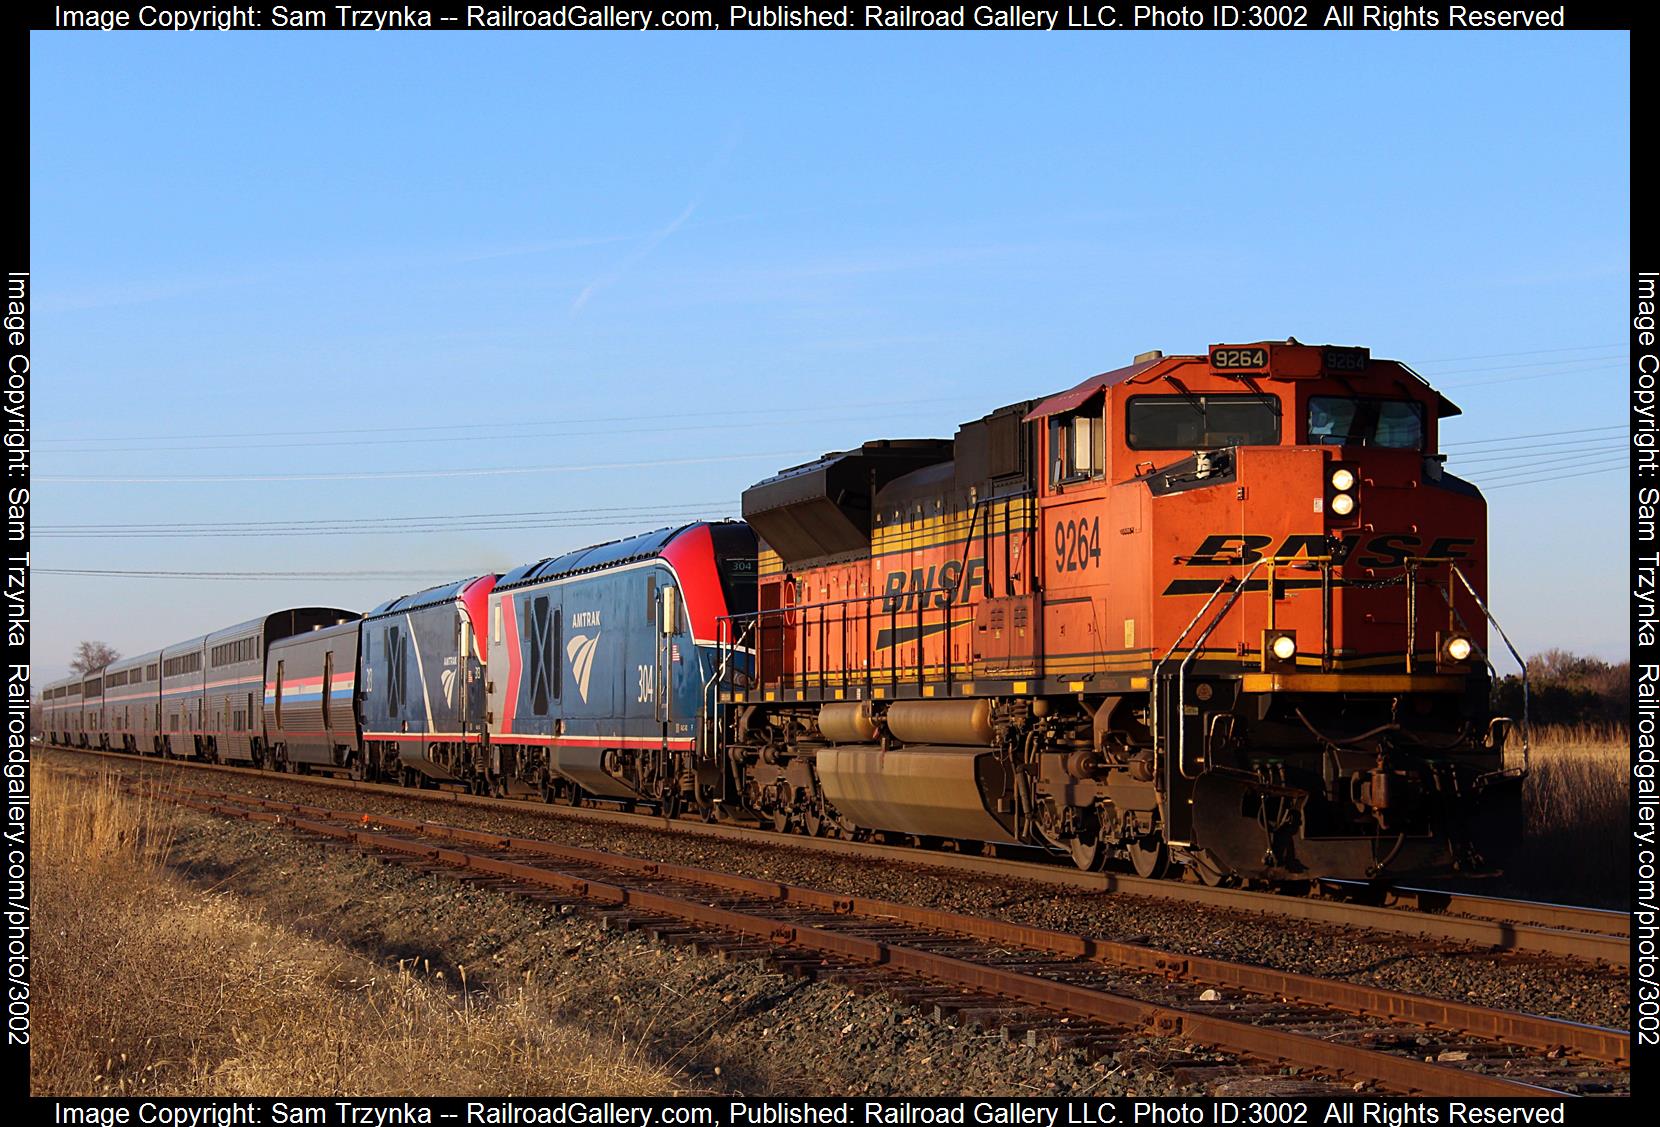 BNSF 9264 is a class EMD SD70ACe and  is pictured in Cottage Grove, Minnesota, USA.  This was taken along the BNSF St. Paul Subdivision on the BNSF Railway. Photo Copyright: Sam Trzynka uploaded to Railroad Gallery on 01/20/2024. This photograph of BNSF 9264 was taken on Wednesday, December 20, 2023. All Rights Reserved. 